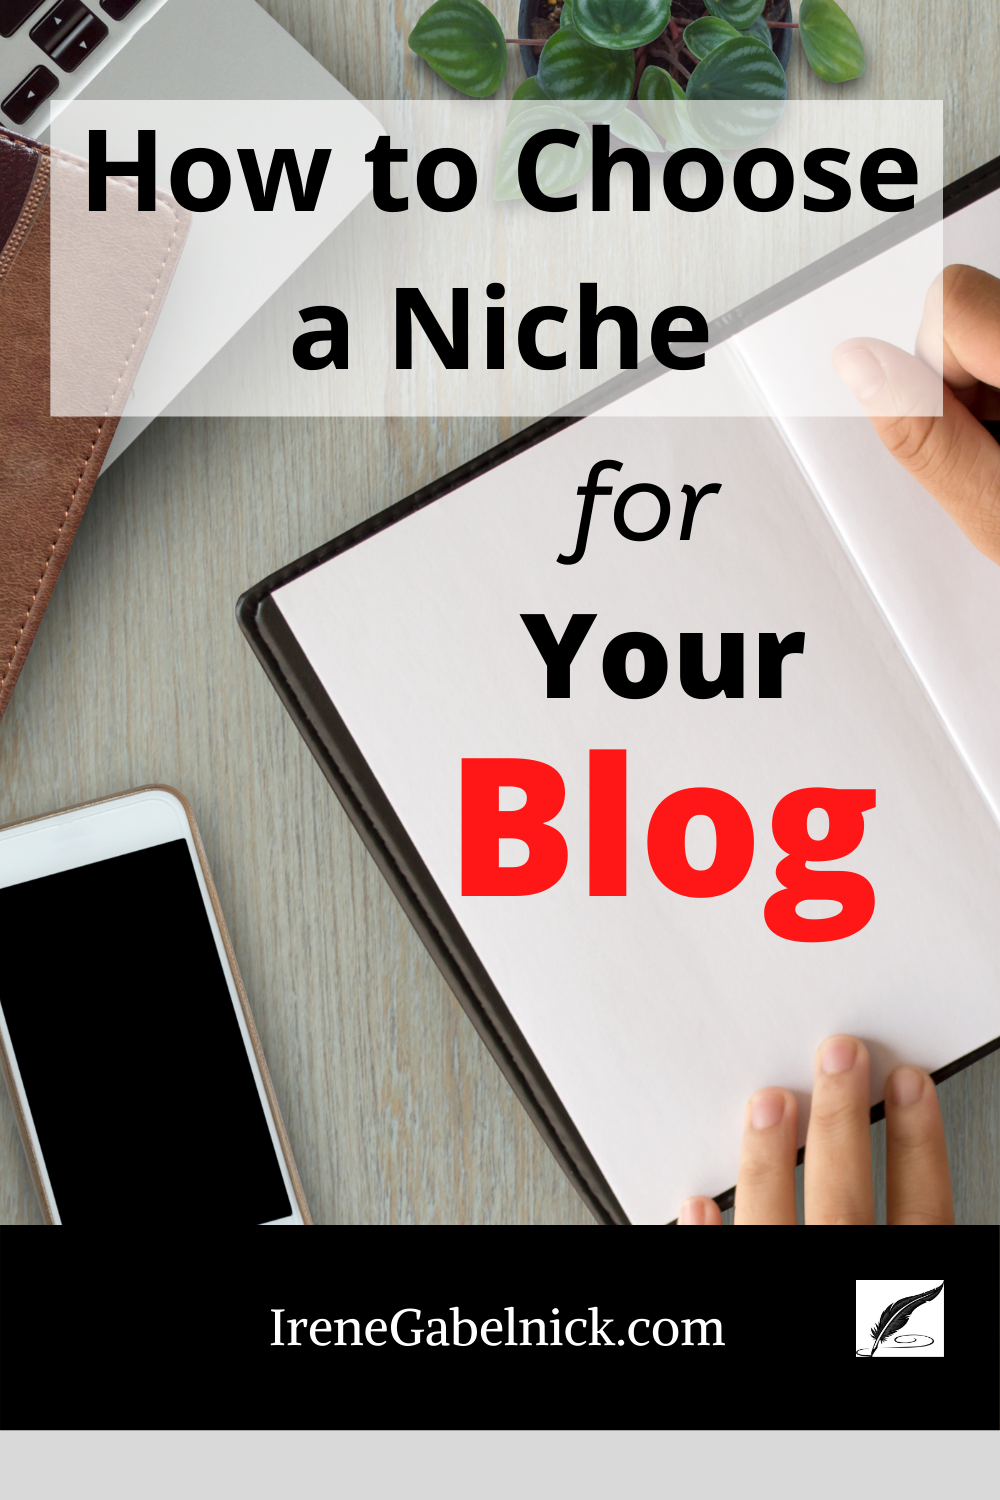 Work from anywhere with only a laptop and an internet connection. Read this to find out how to pick your perfect niche for your blog... #workfromhome #StartaBlog #blogging #lifestyle #grateful #thank